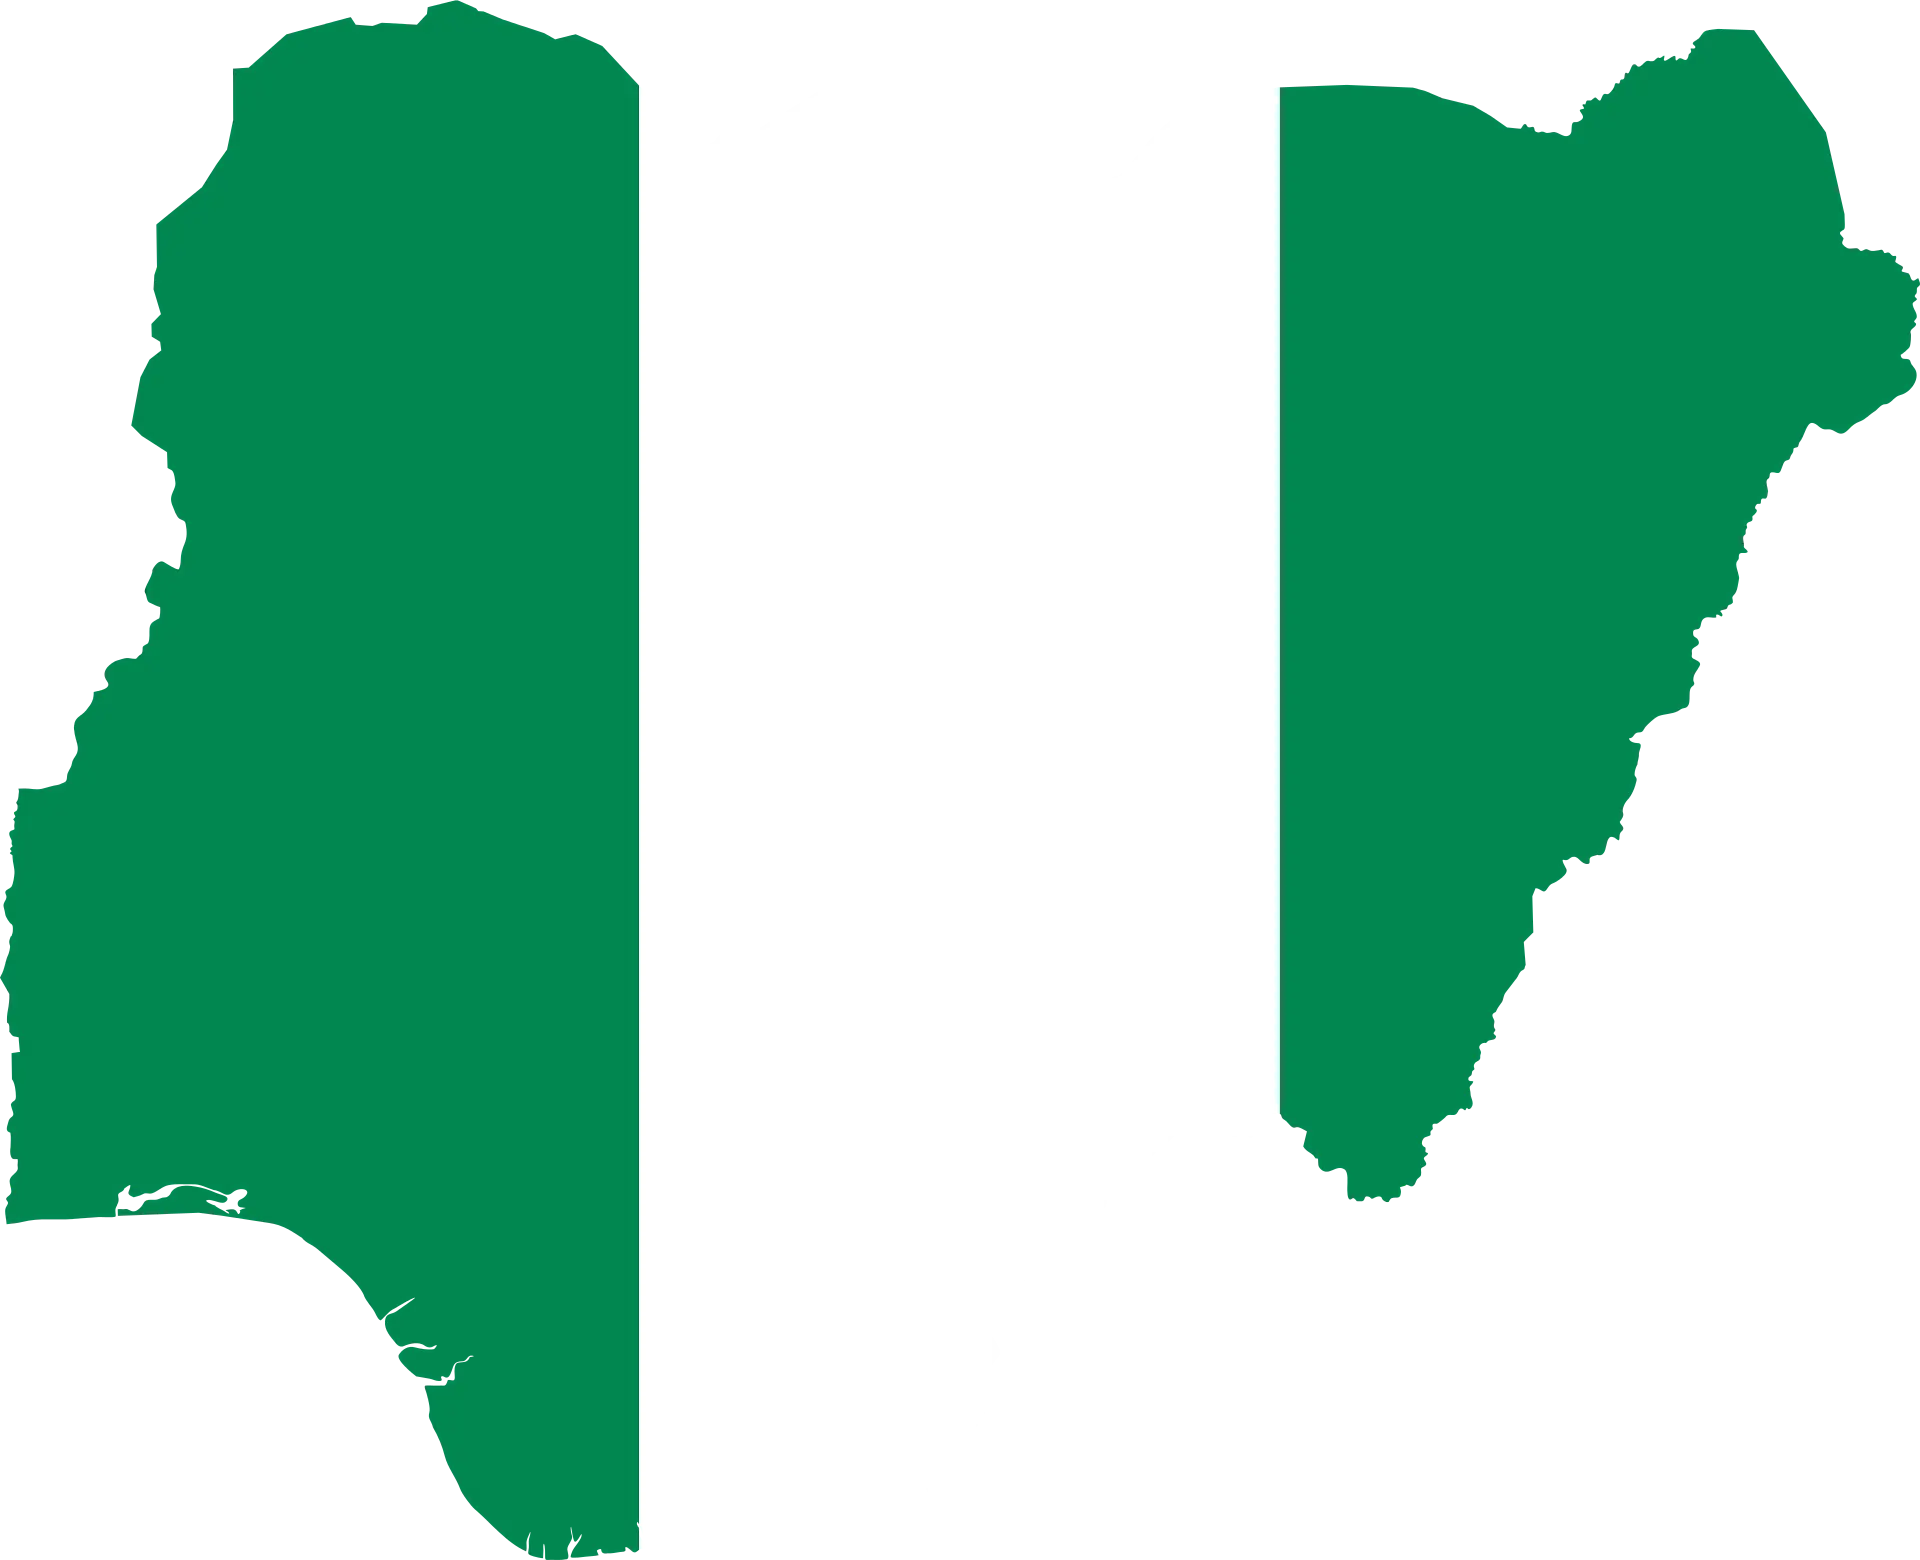 Smartest People, Mediocre Nation - The Irony Of Nigeria